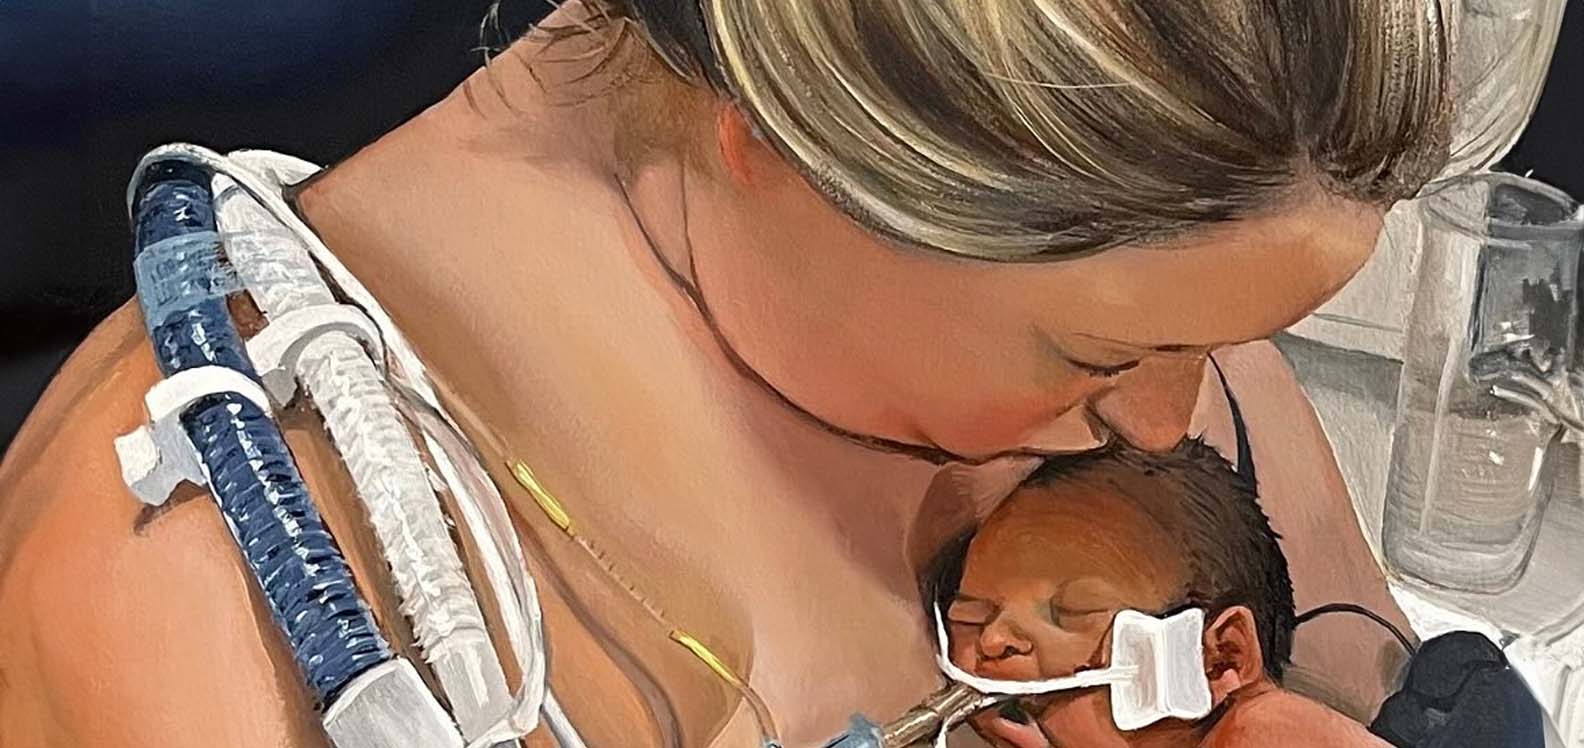 Woman kisses the head of a premature baby she is nursing in hospital surrounded by medical equipment.